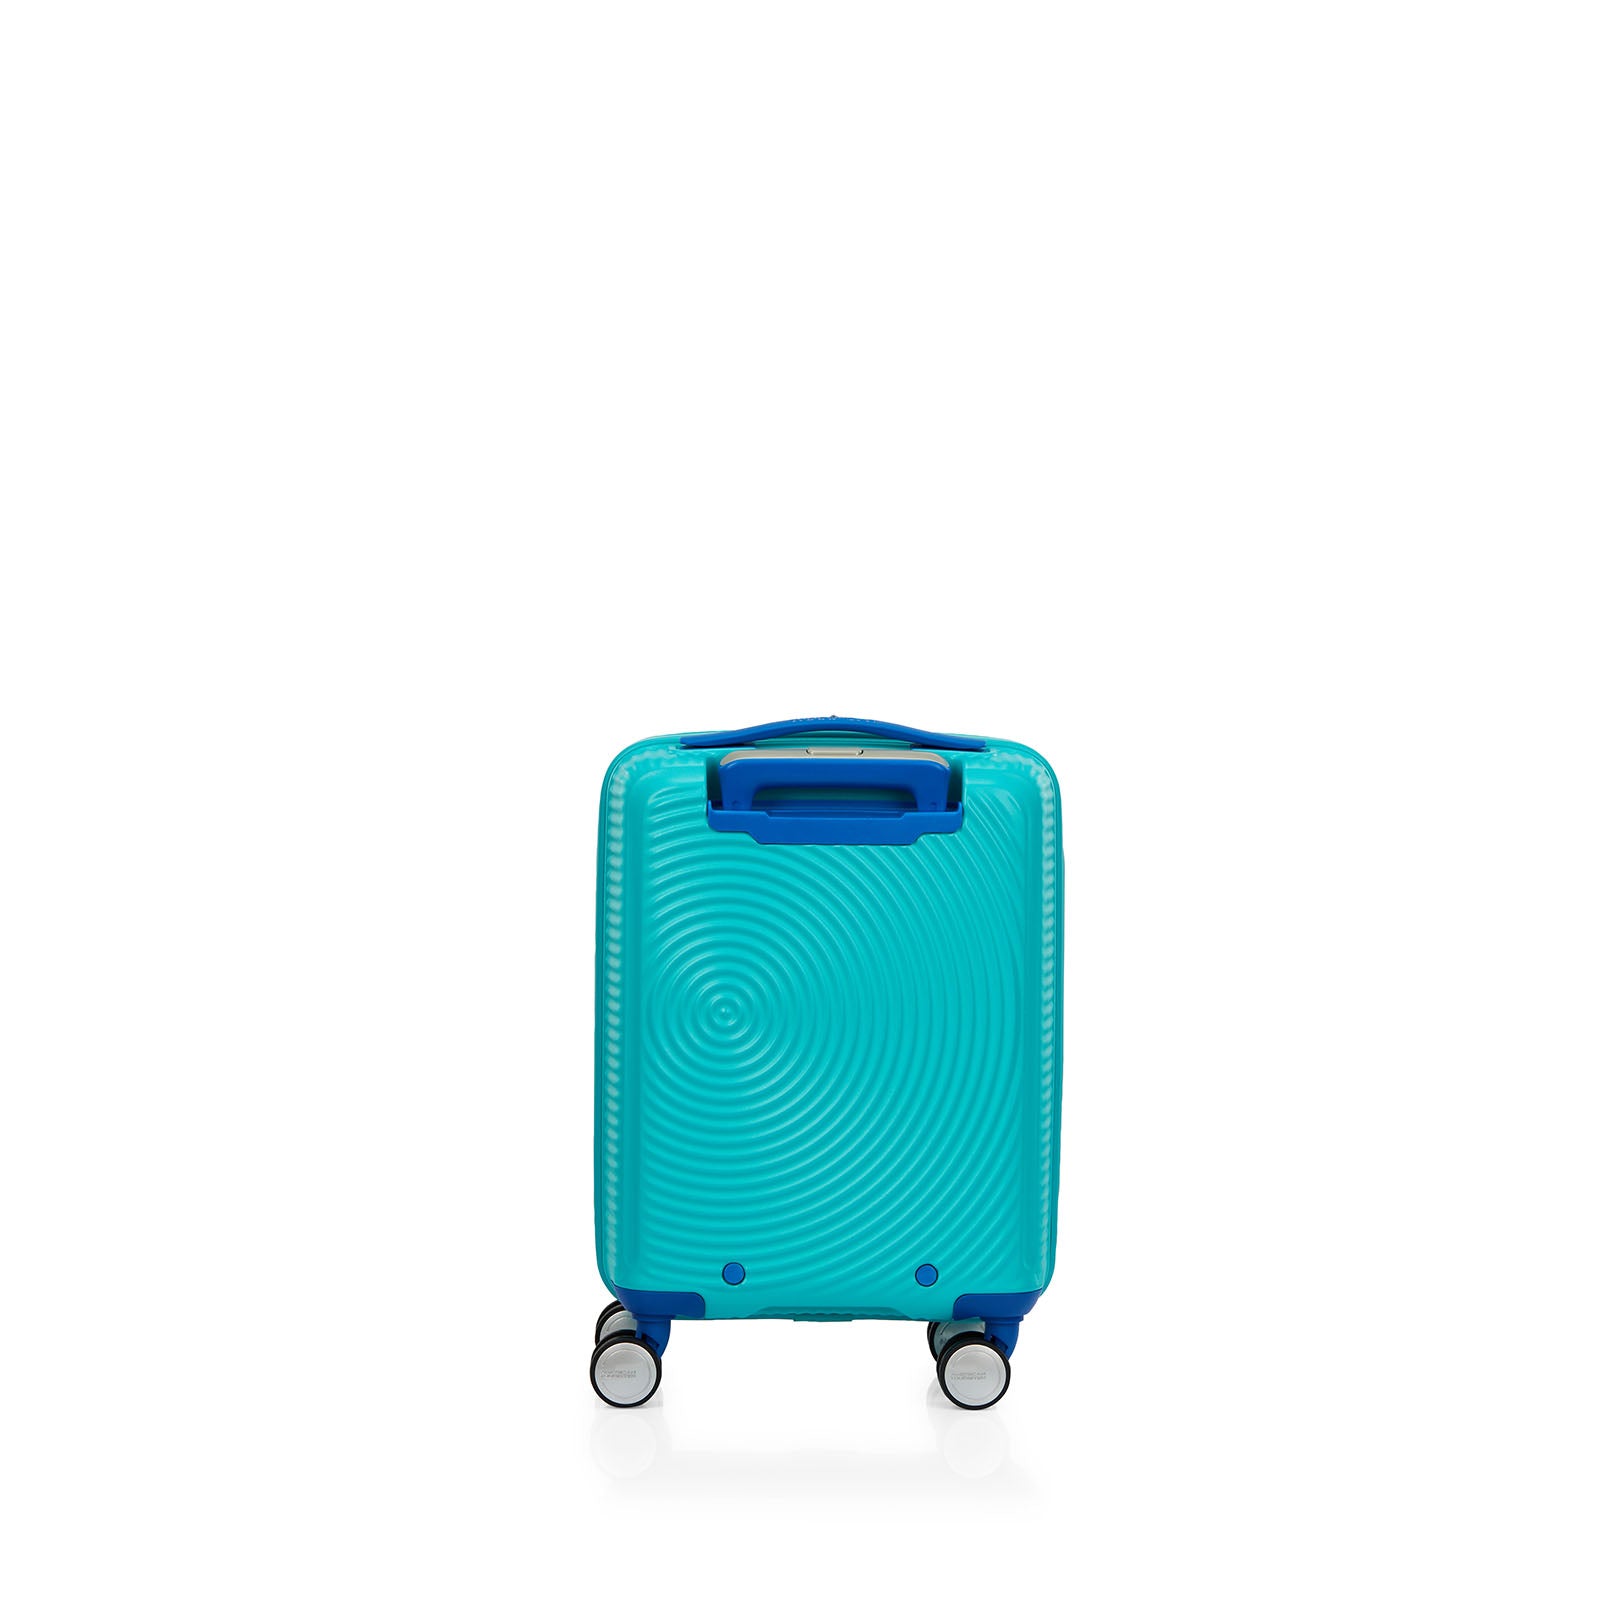 American-Tourister-Little-Curio-47cm-Carry-On-Suitcase-Teal-Blue-Back